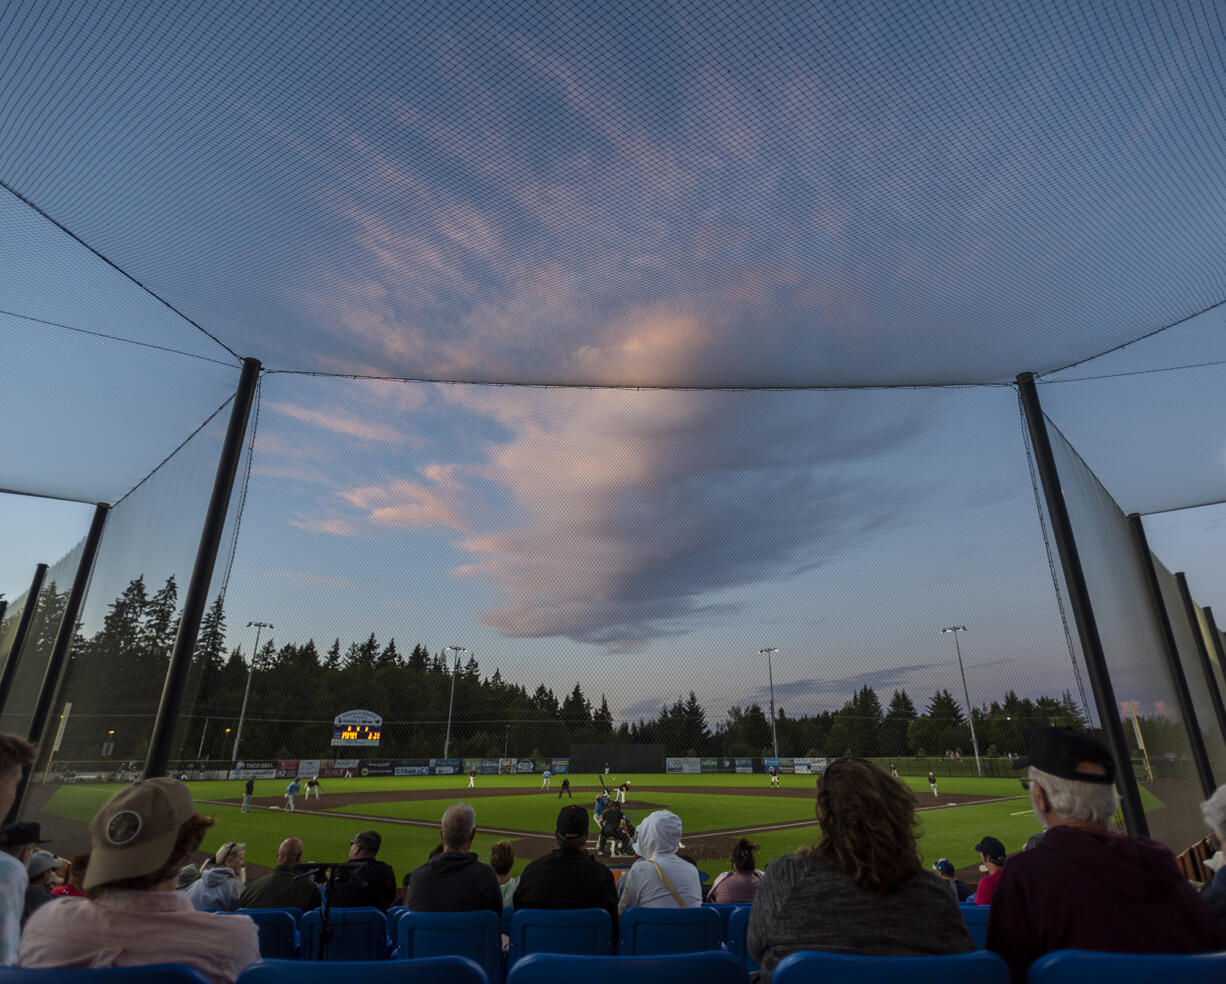 The sunset illuminates a cloud over the Ridgefield Outdoor Recreation Complex on Tuesday, July 12, 2022, during a game between the Ridgefield Raptors and the Bellingham Bells.